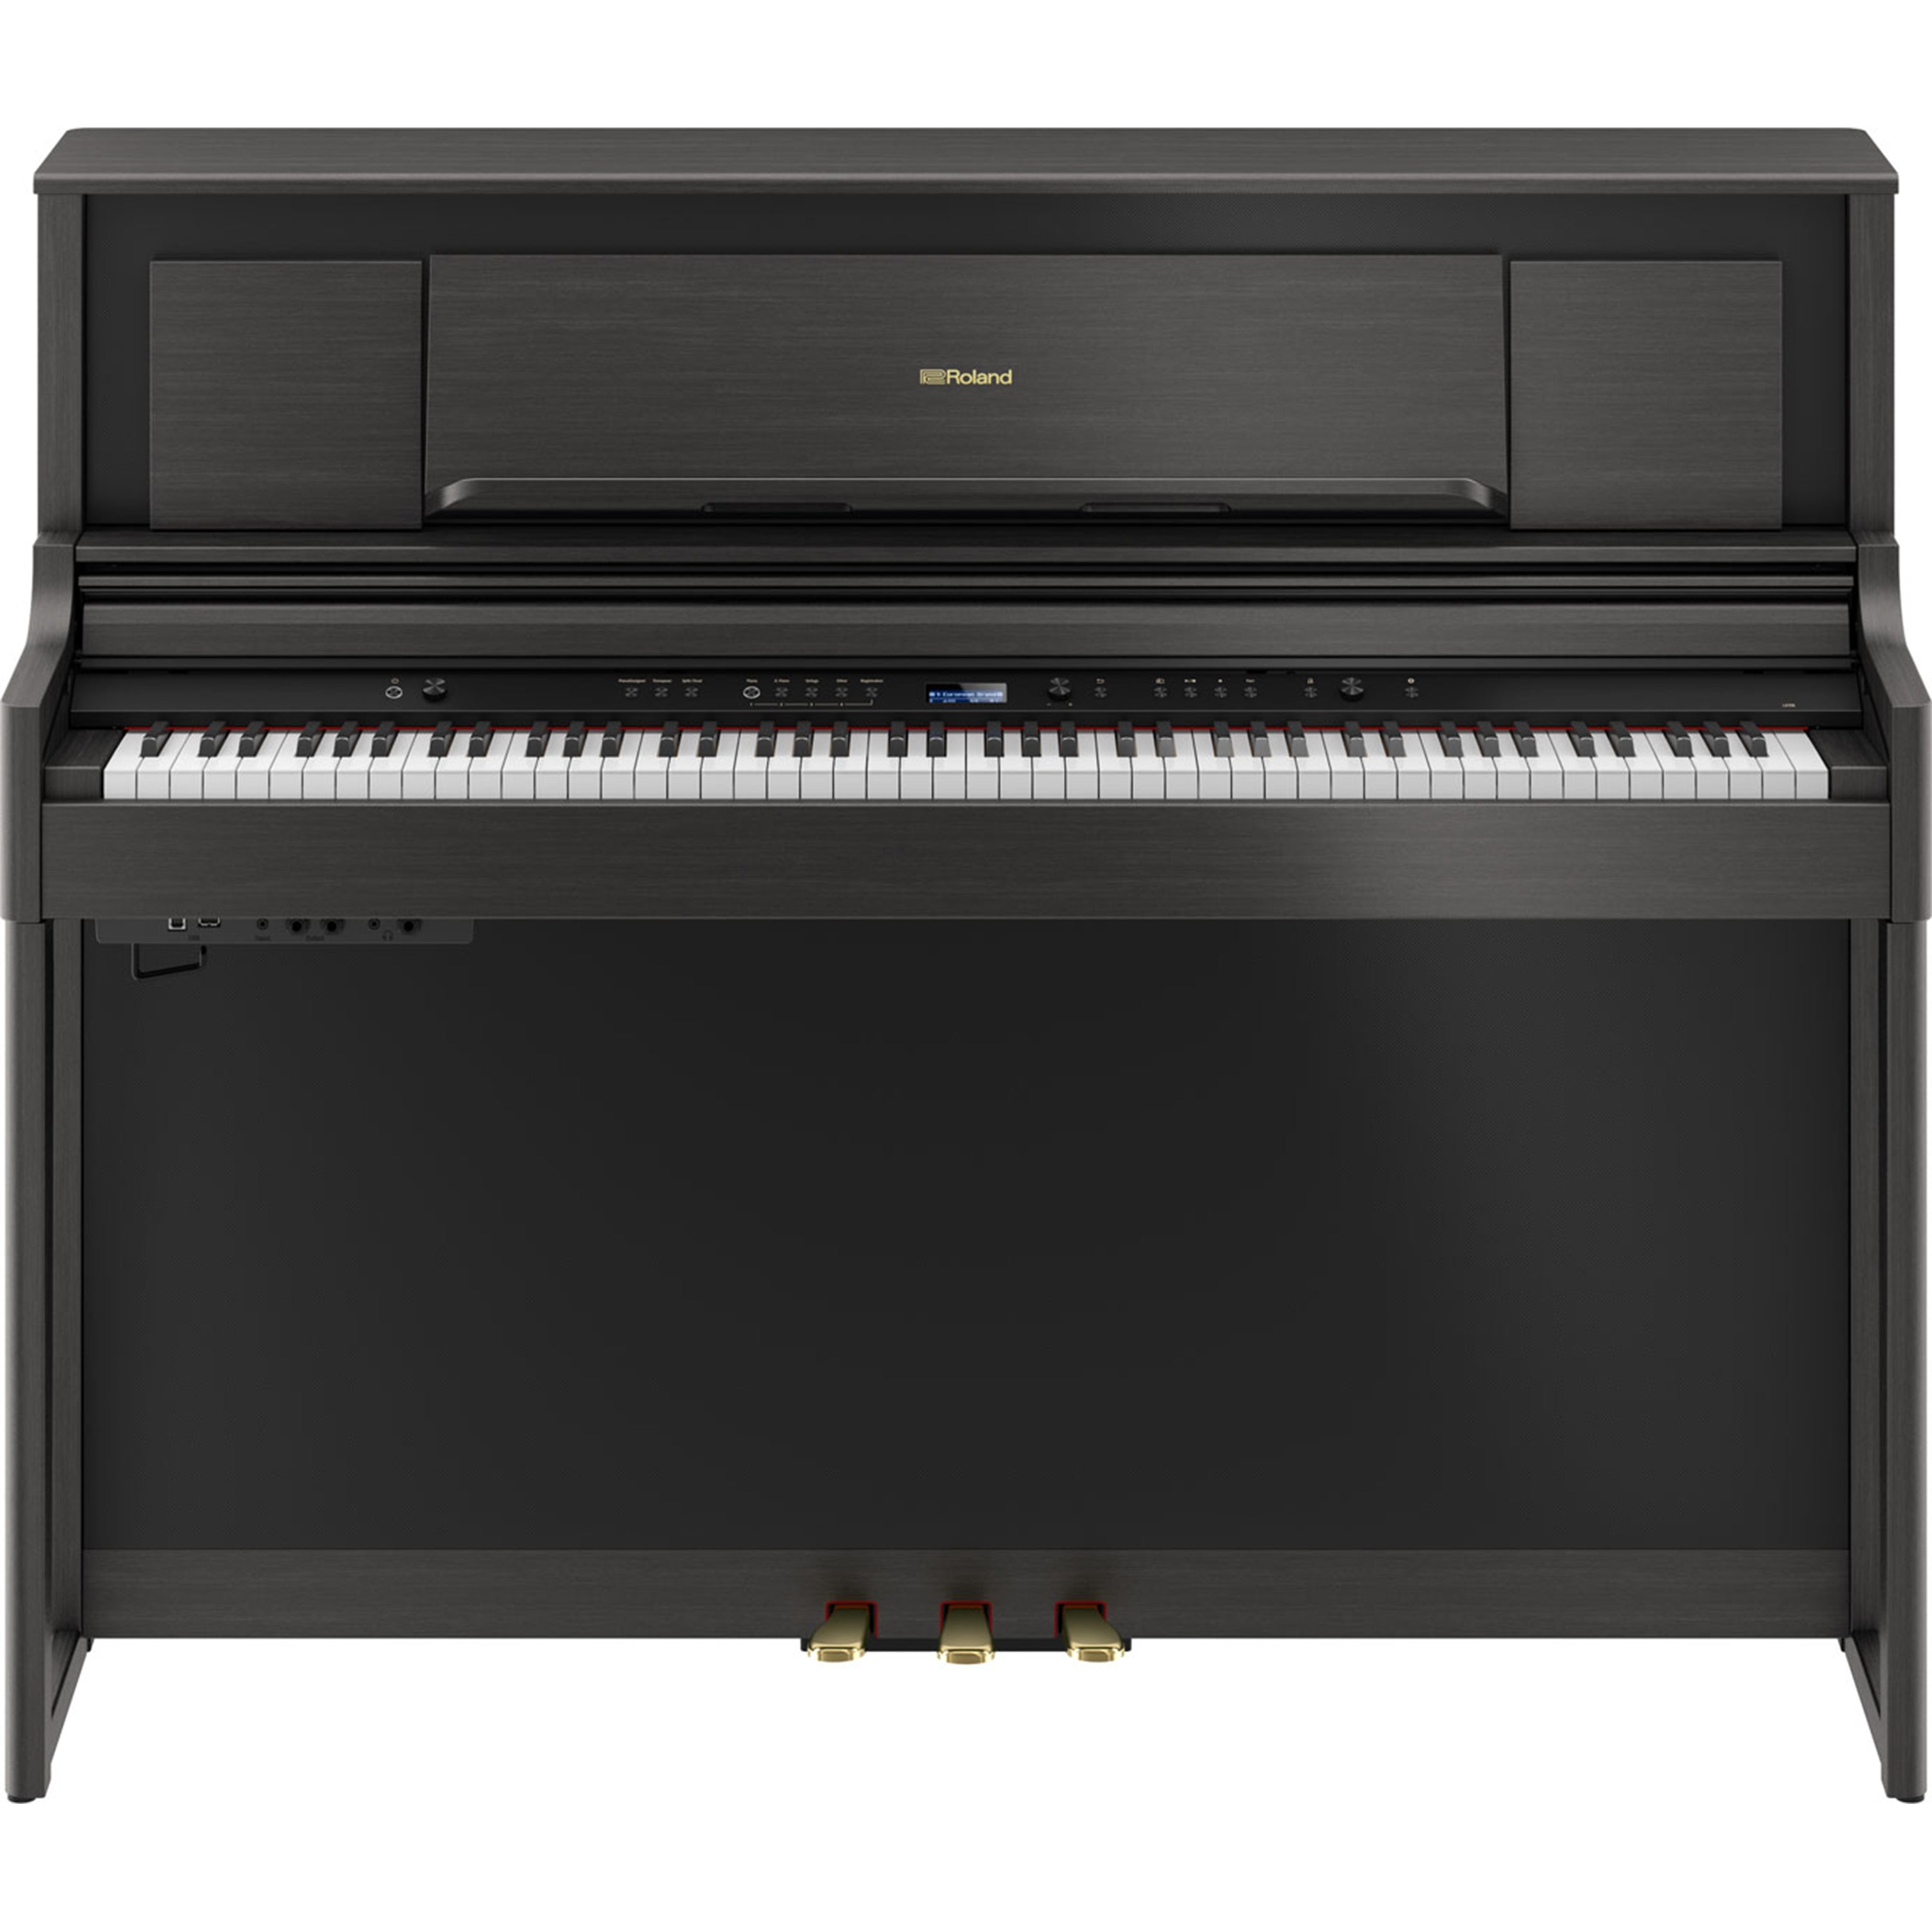 Roland LX706 Digital Piano - Charcoal Black - front catalog view